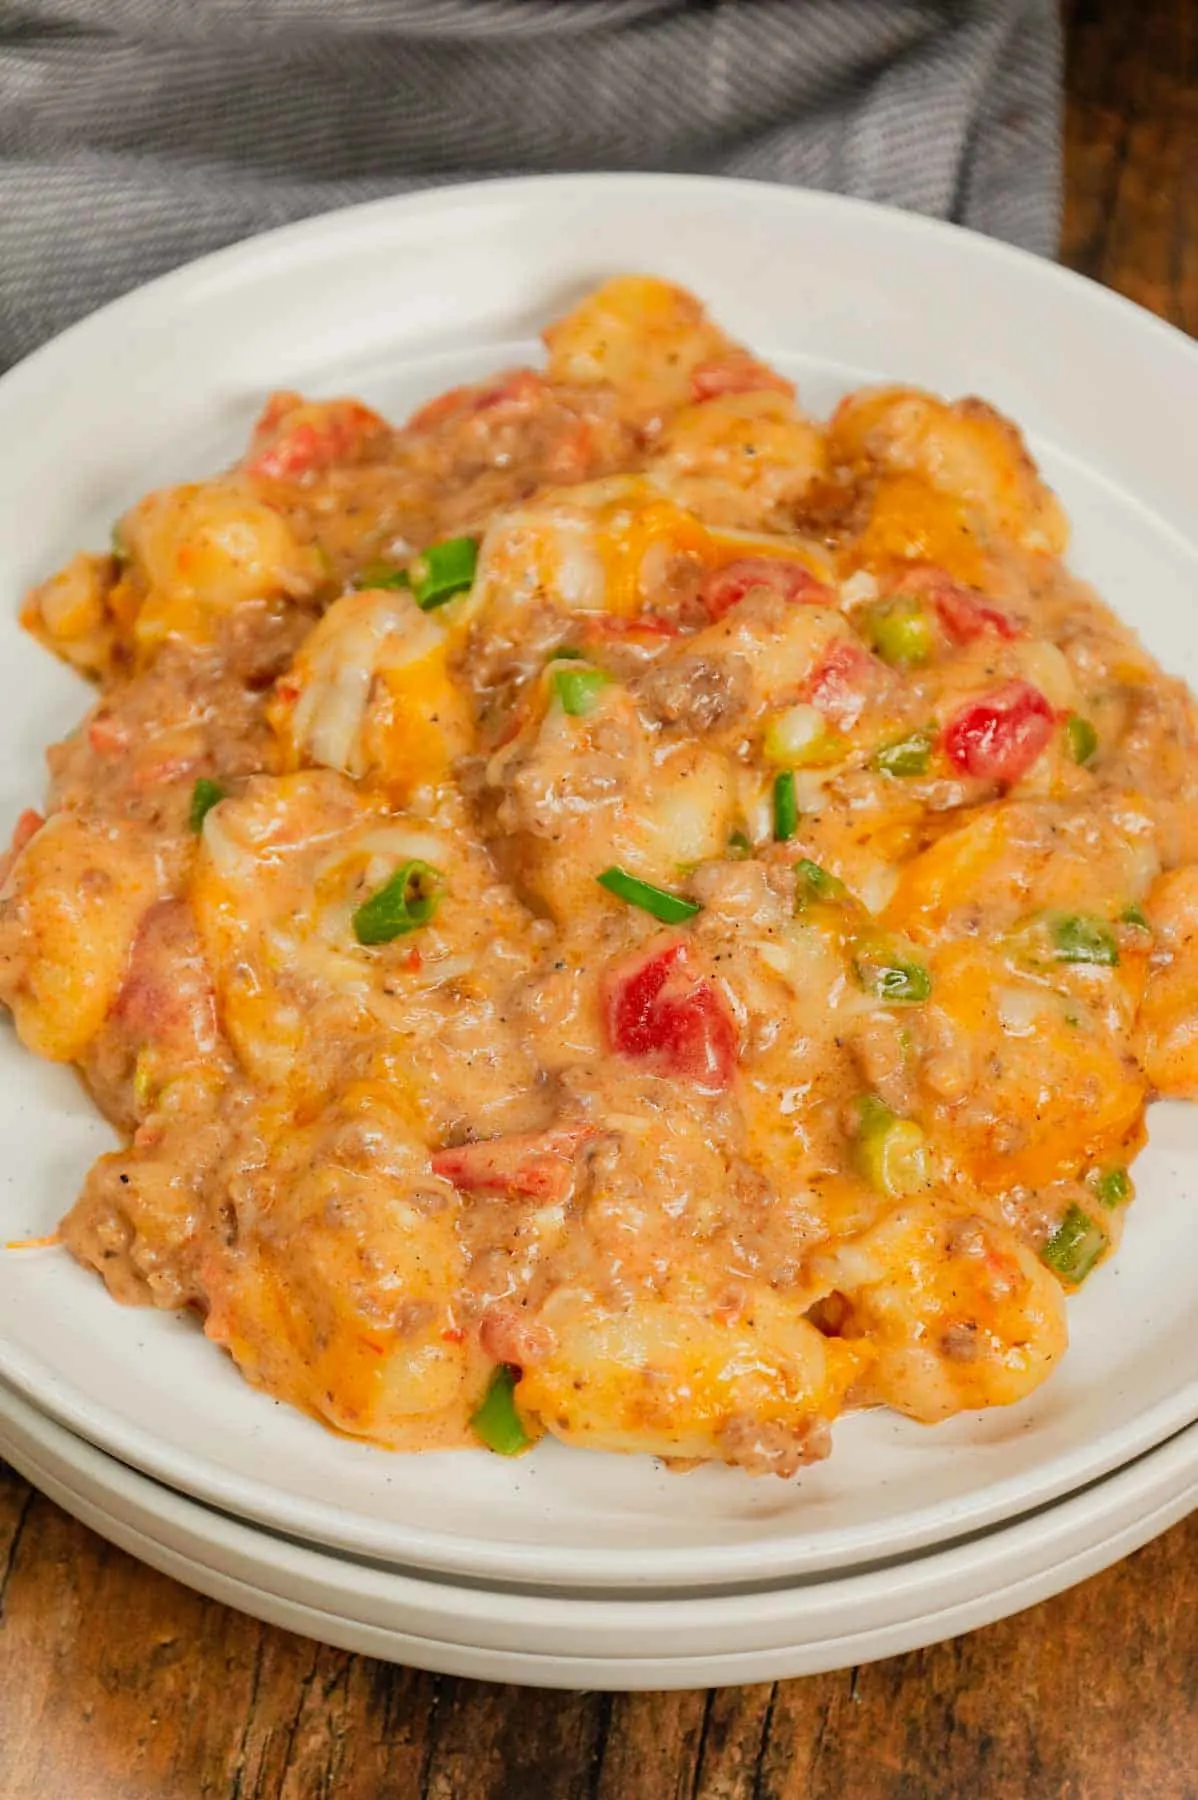 Cheeseburger Gnocchi is a hearty ground beef dinner recipe loaded with potato gnocchi, Rotel, chopped green onions and shredded cheese with a creamy sauce made from cheddar soup and milk.